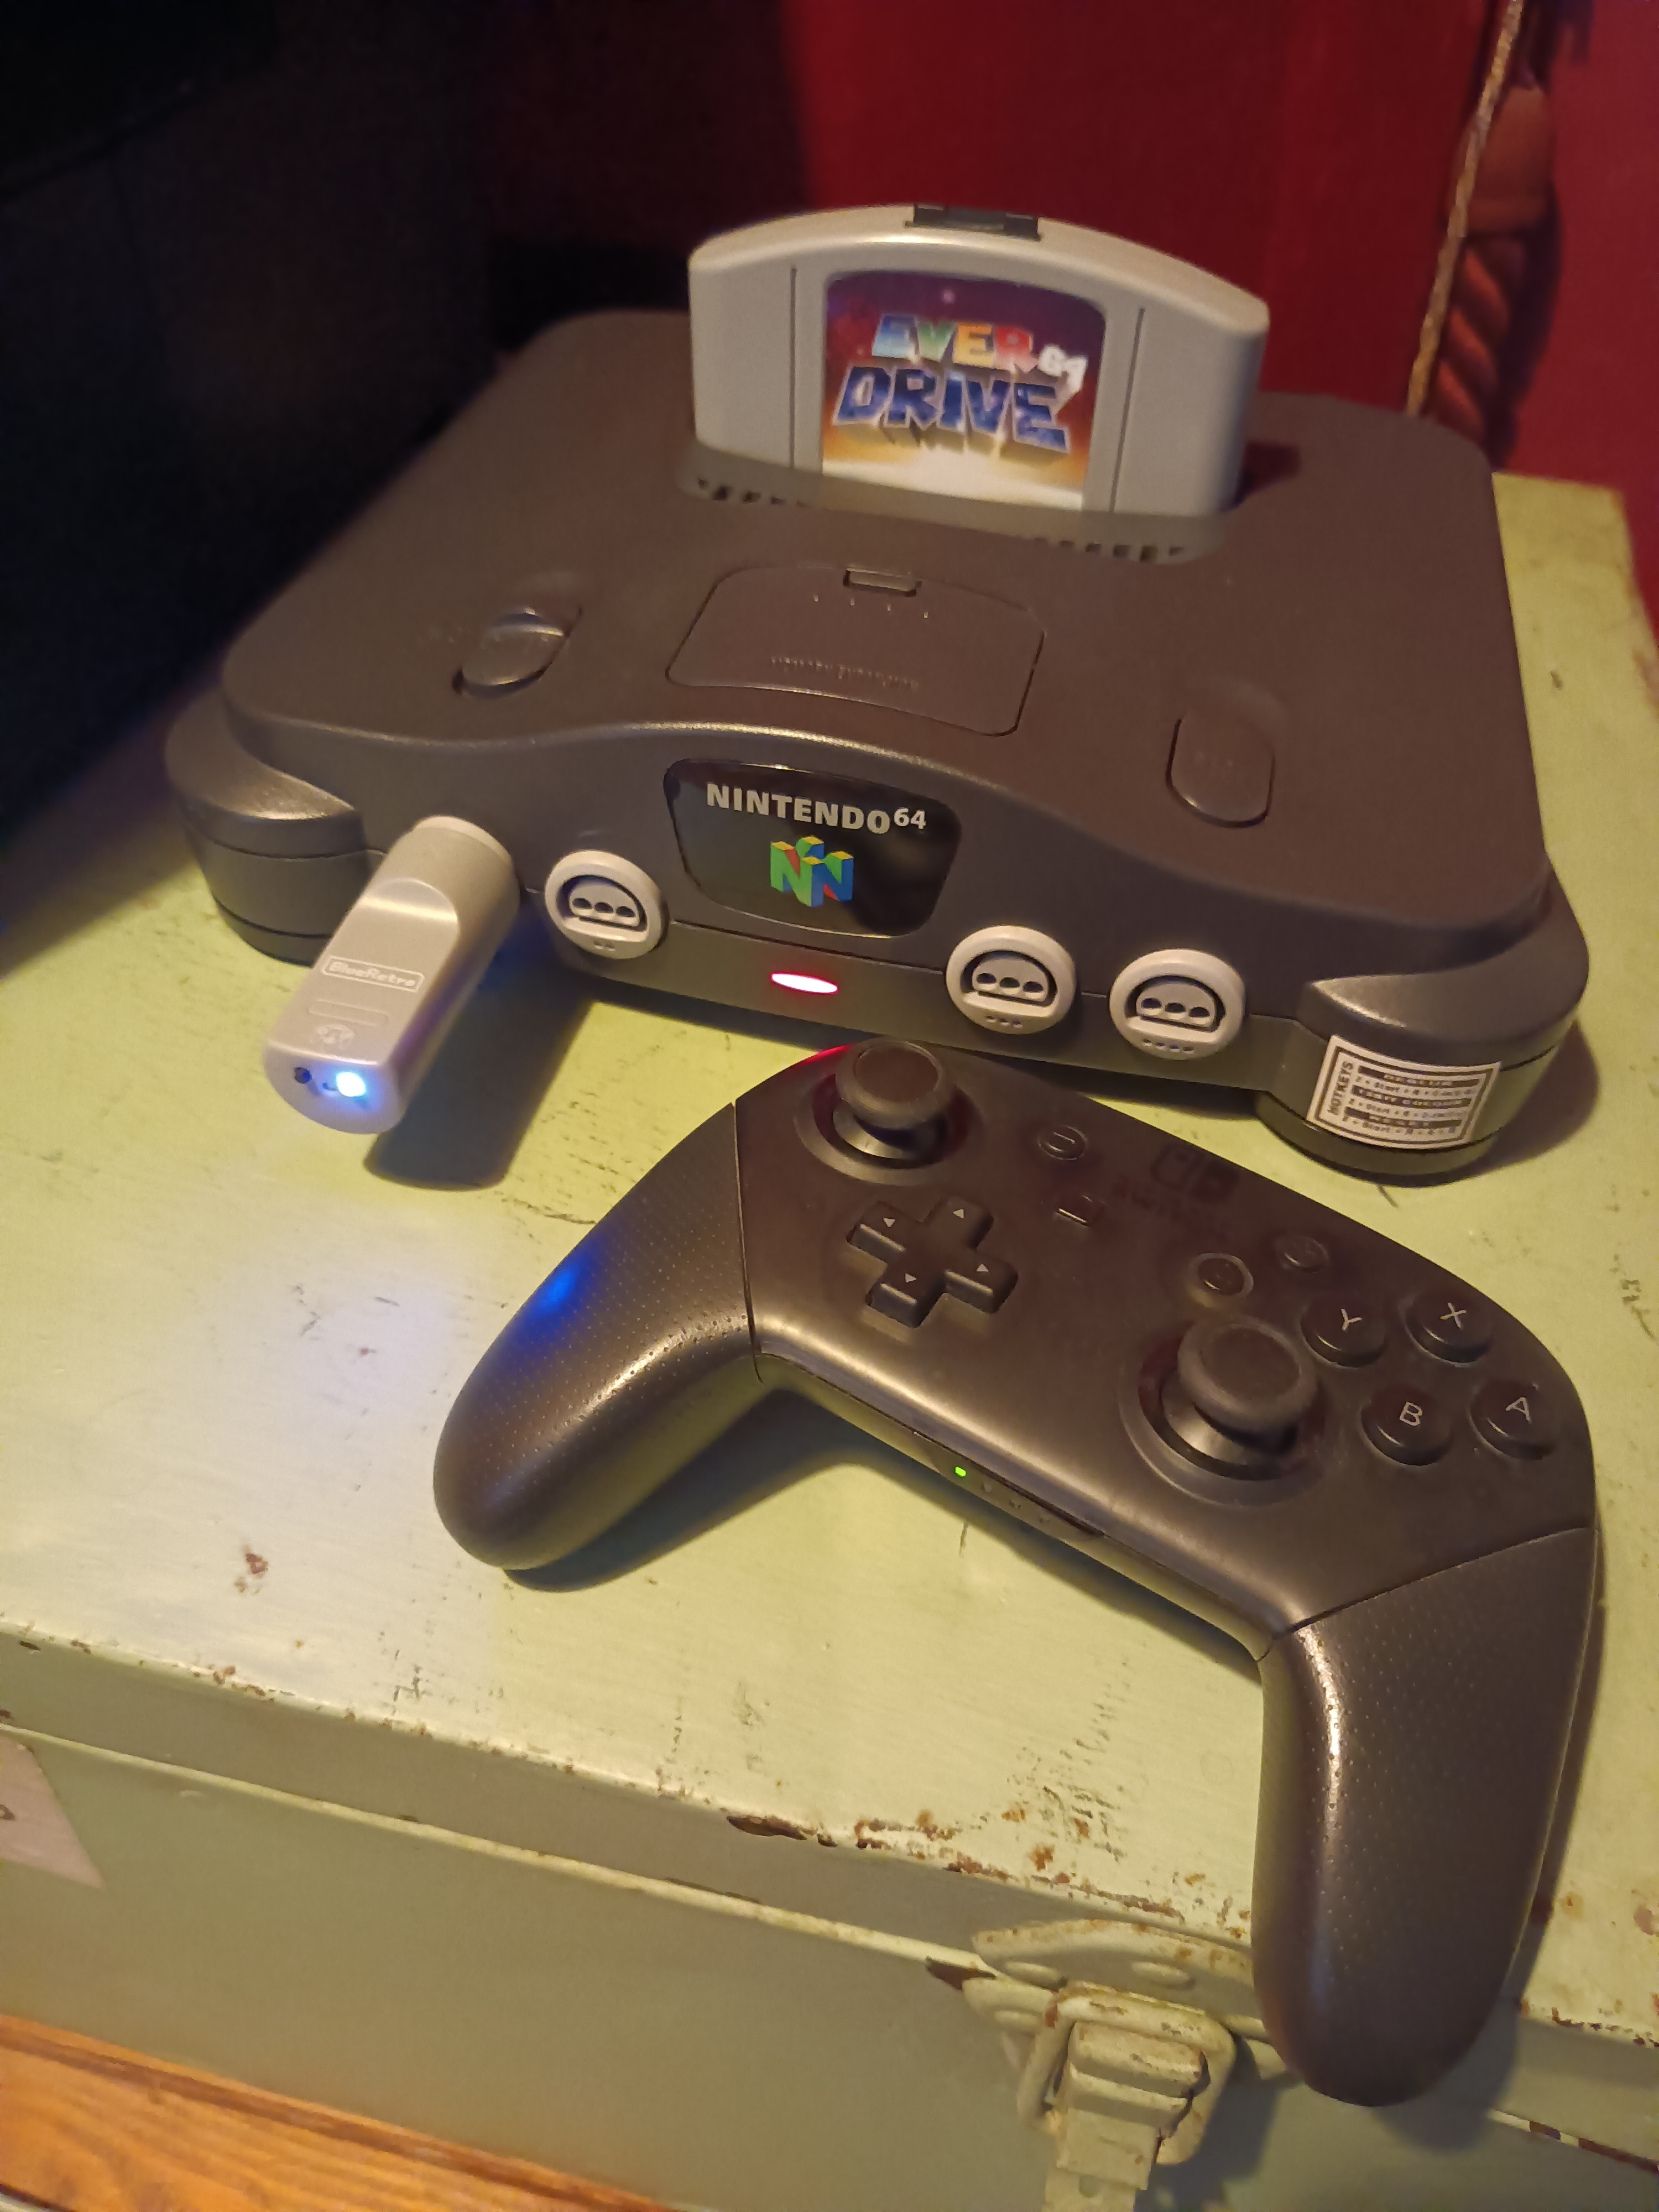 Using a modern Bluetooth adapter to connect a Nintendo 64 to a Nintendo Switch controller